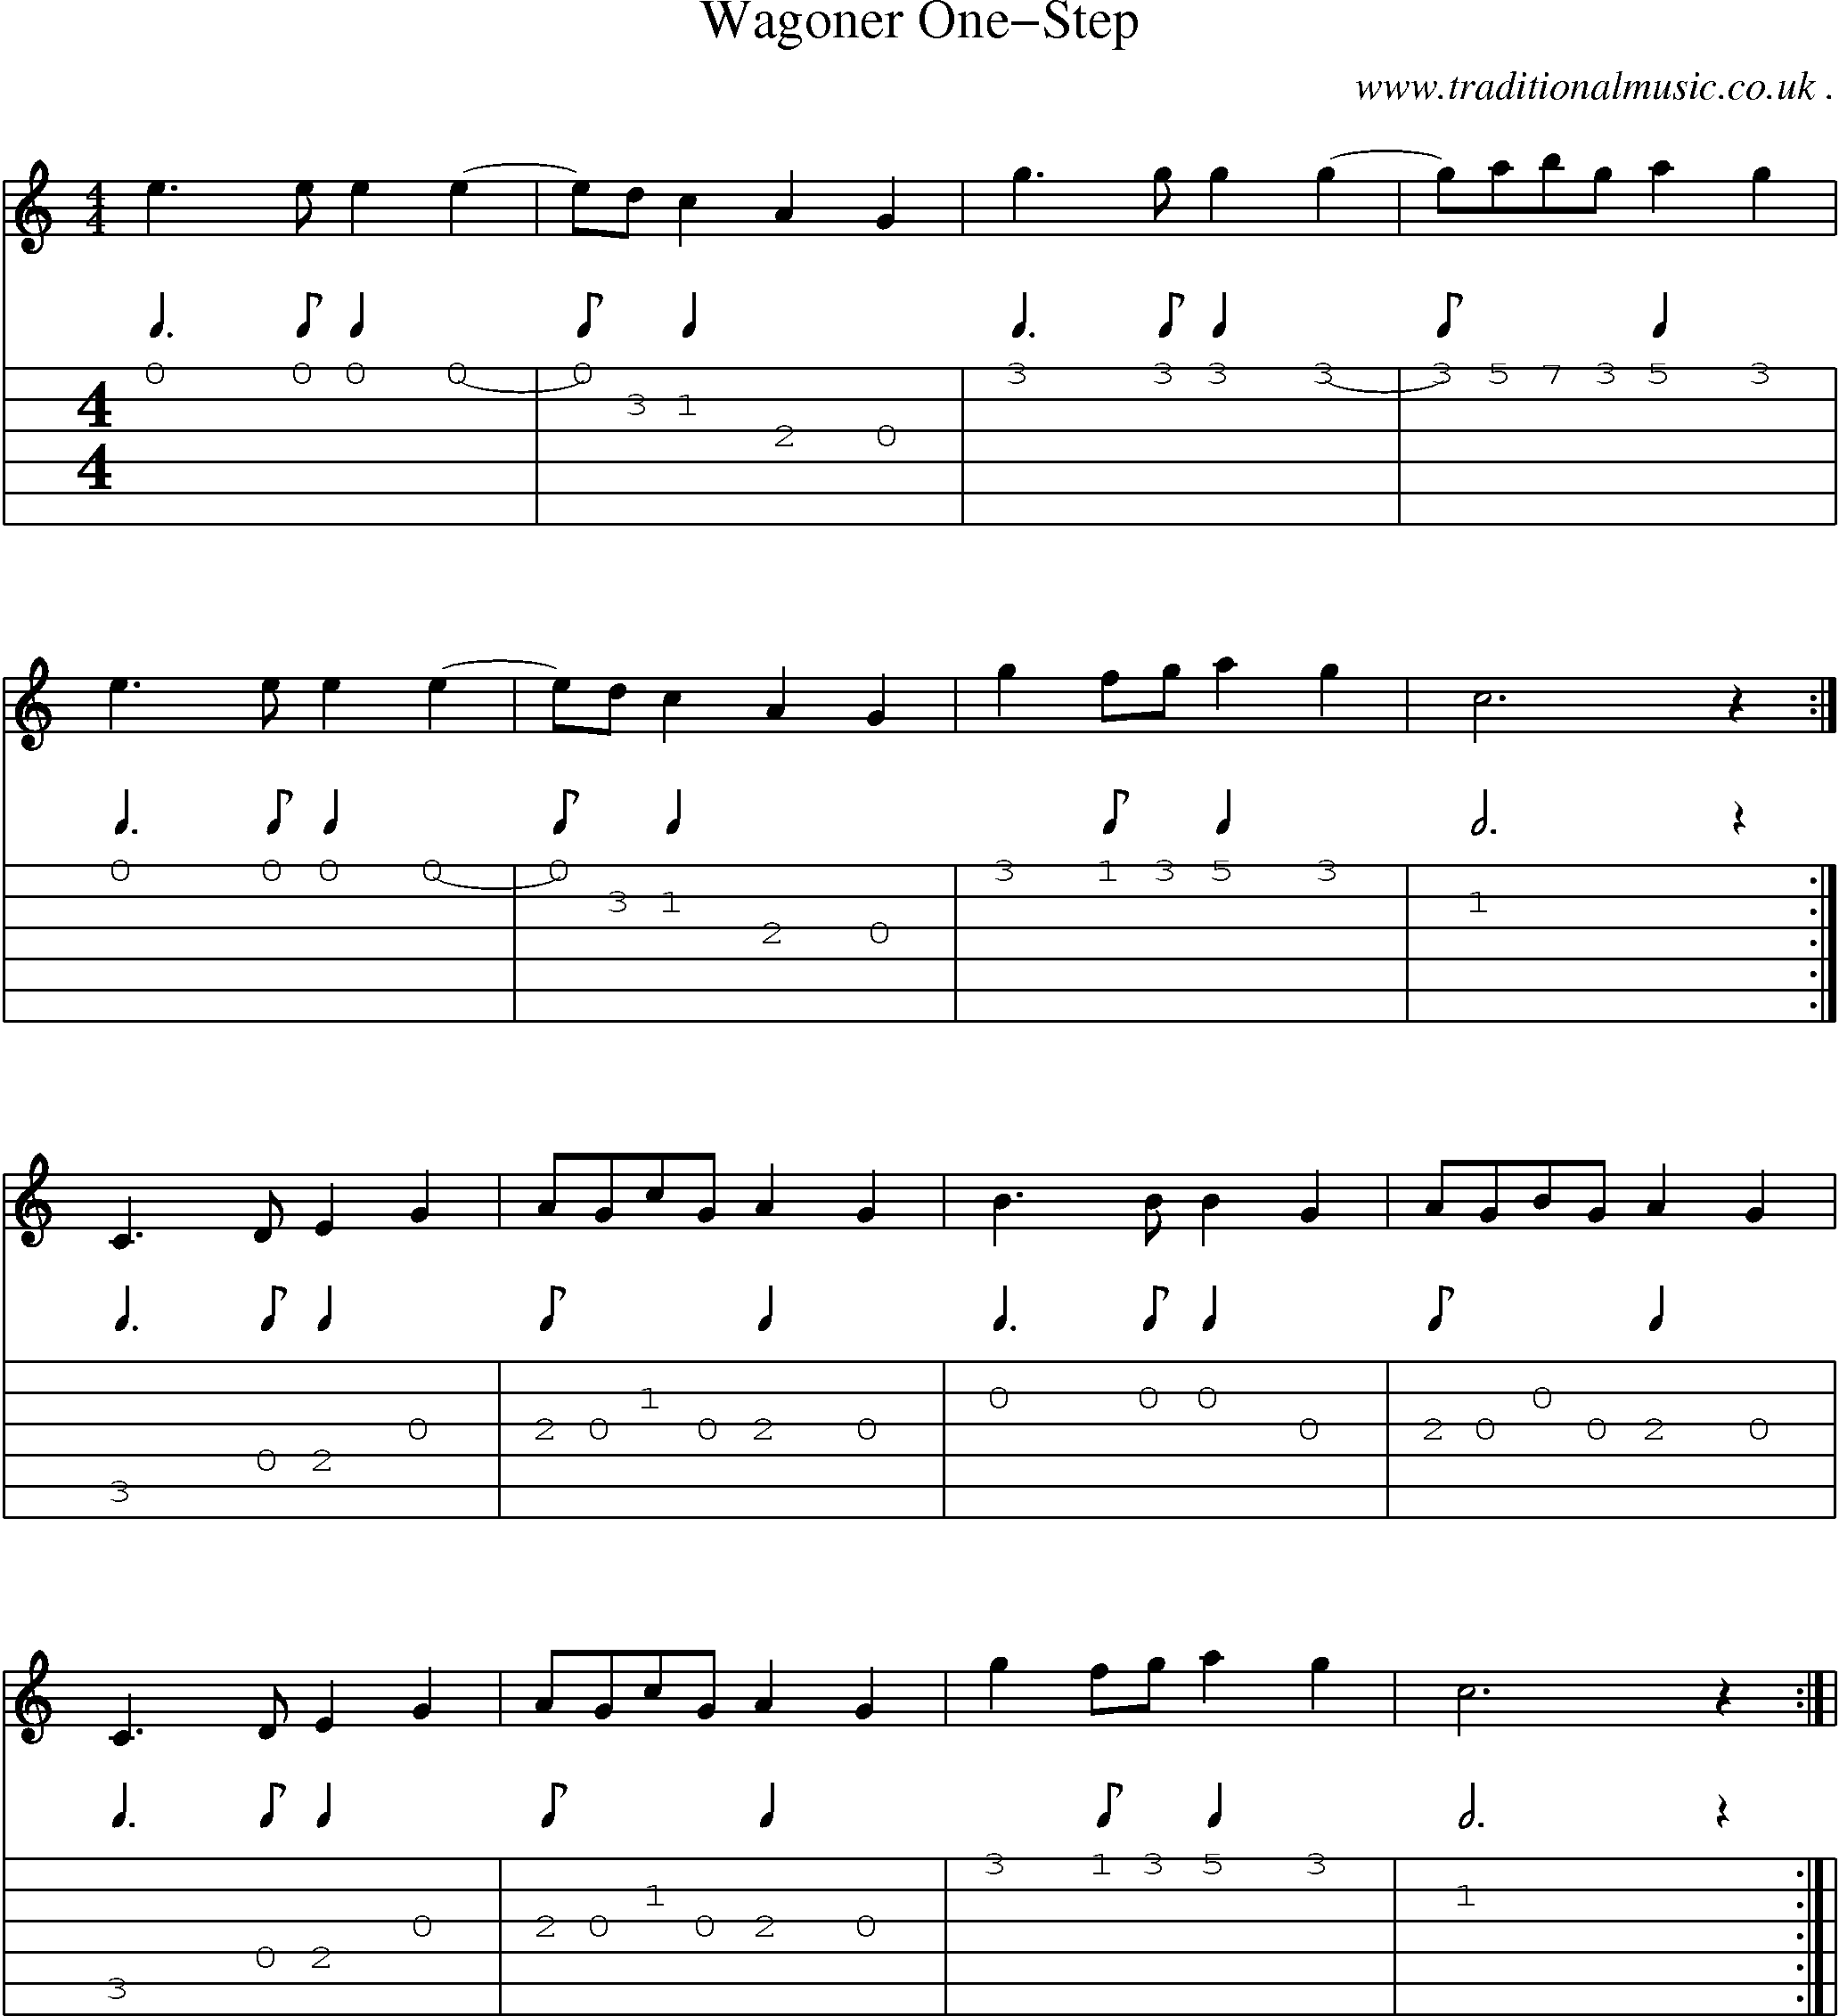 Music Score and Guitar Tabs for Wagoner One-step